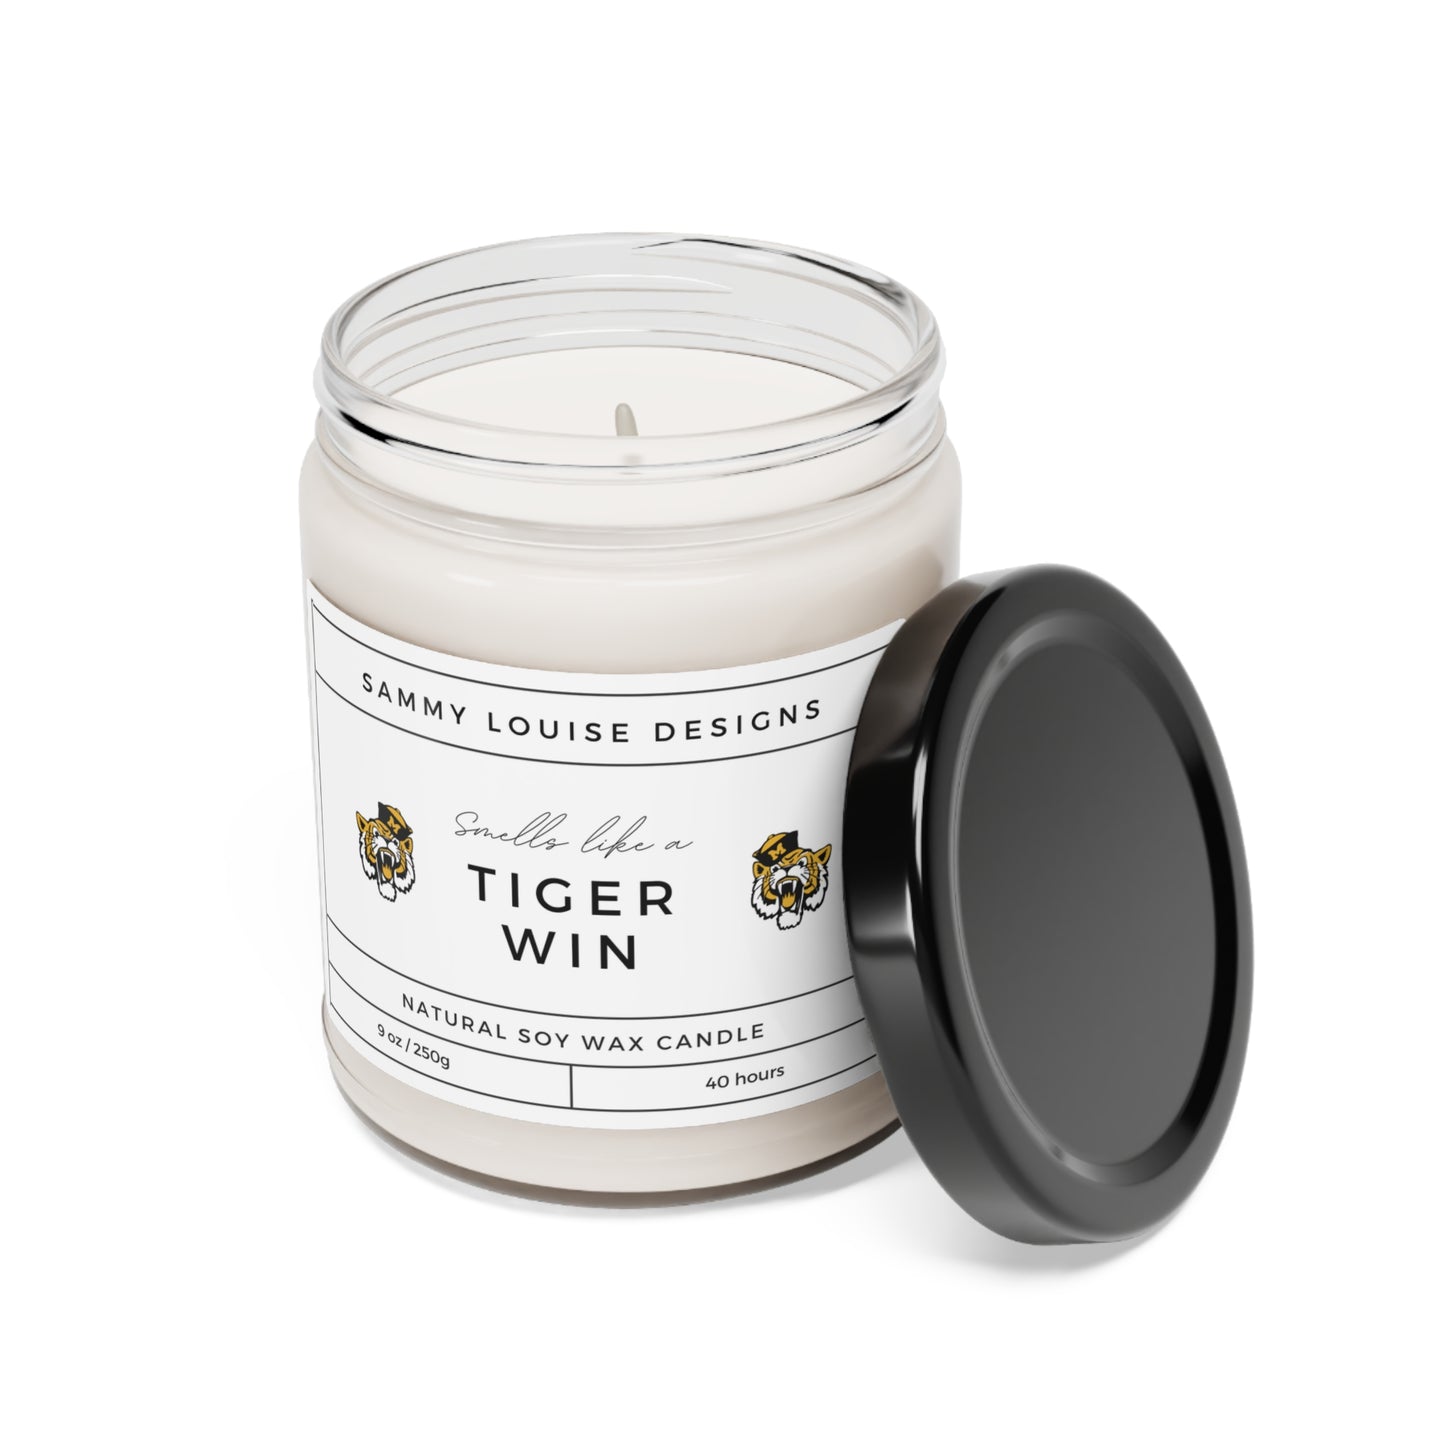 Smells like a Tiger Win Scented Soy Candle, 9oz